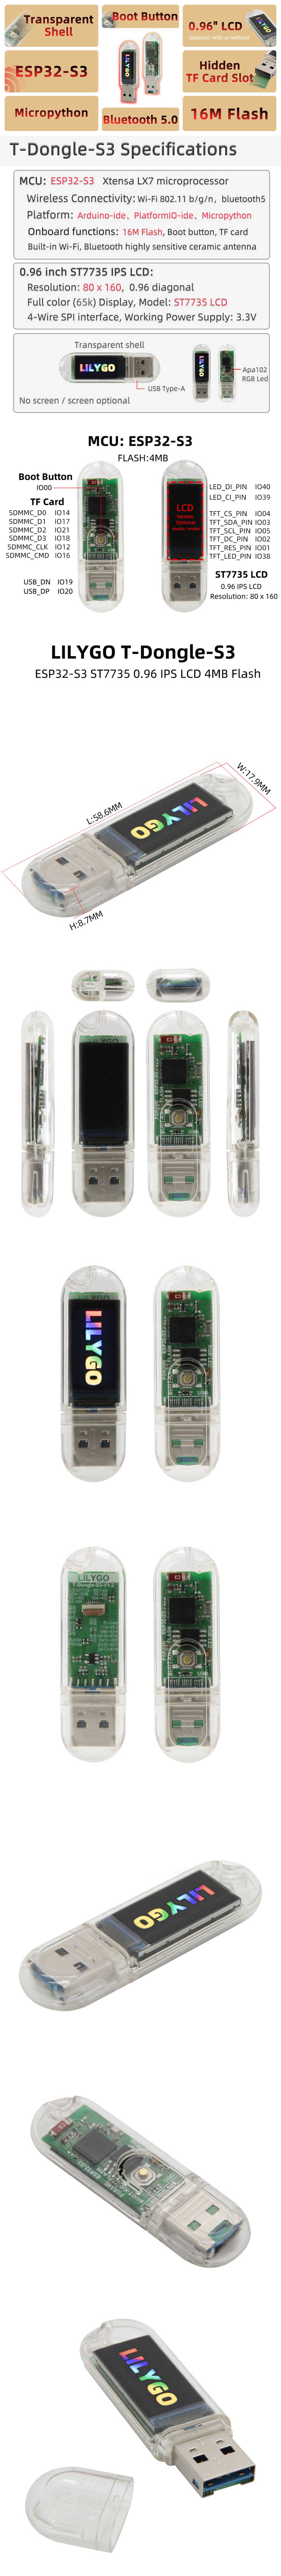 LILYGO T-Dongle-S3 Development Board 0.96inch LCD Display Screen Support WiFi bluetooth TF Card